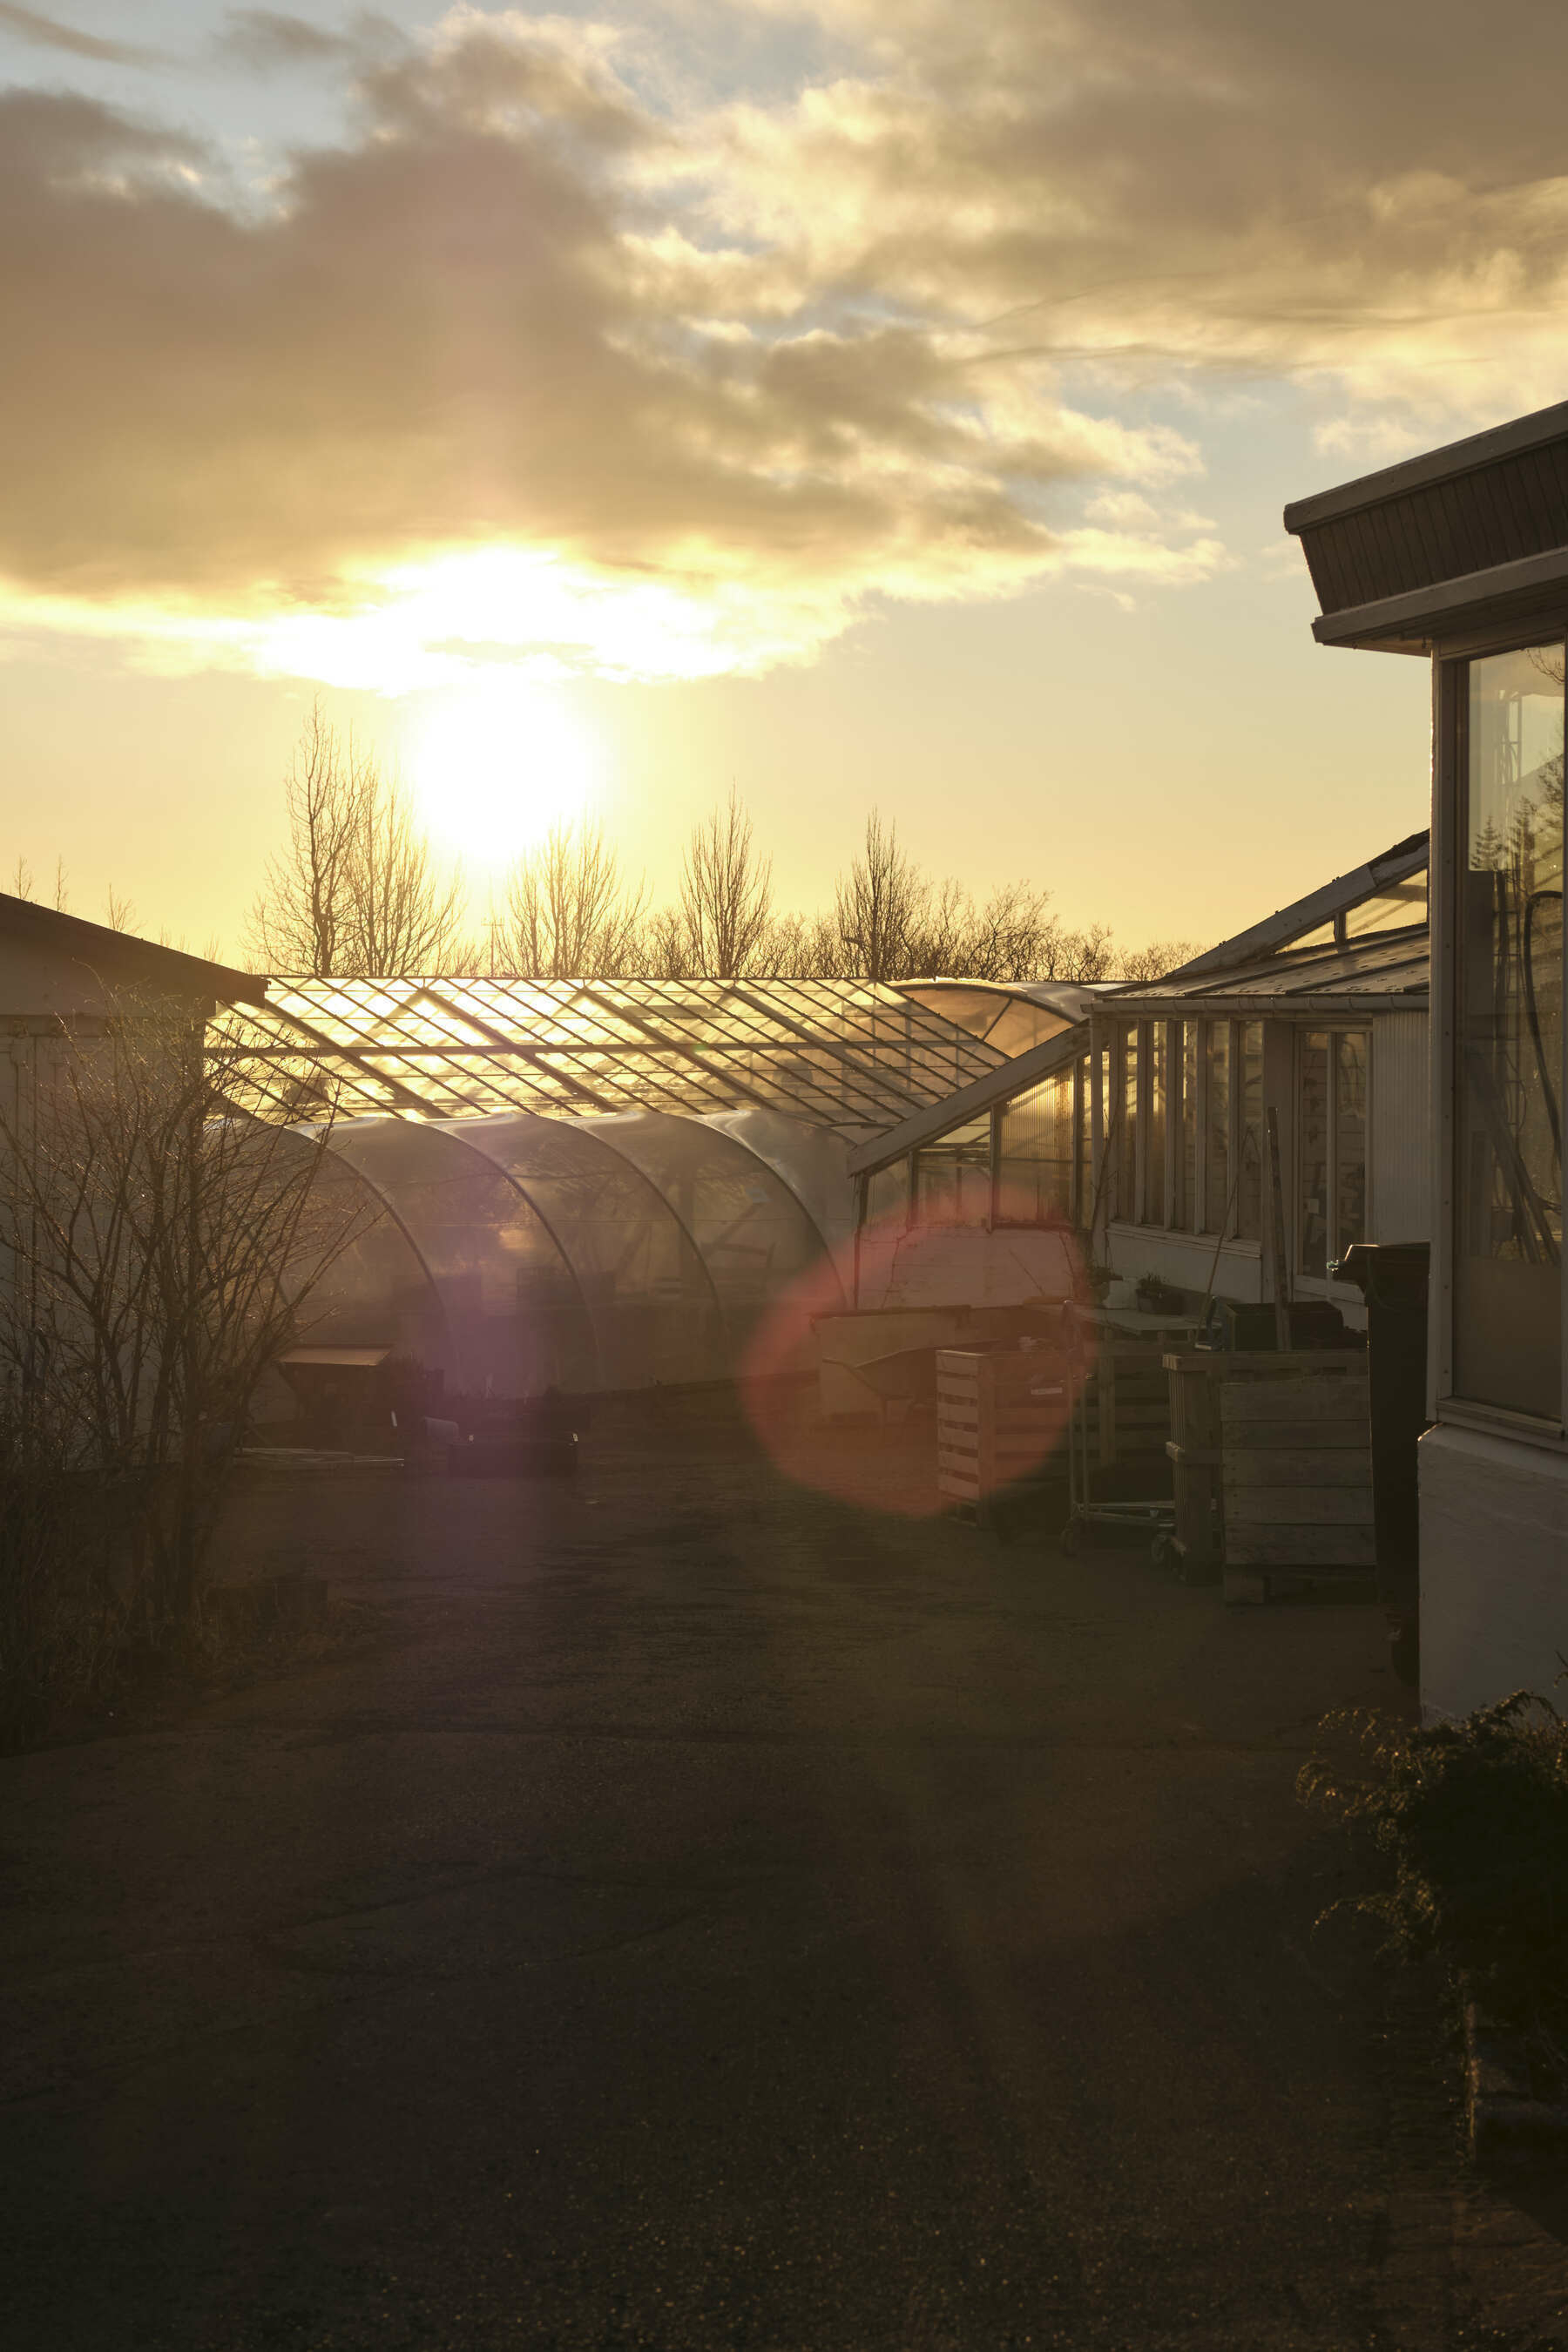 The sun sets behind another one of Hveragerði's greenhouses